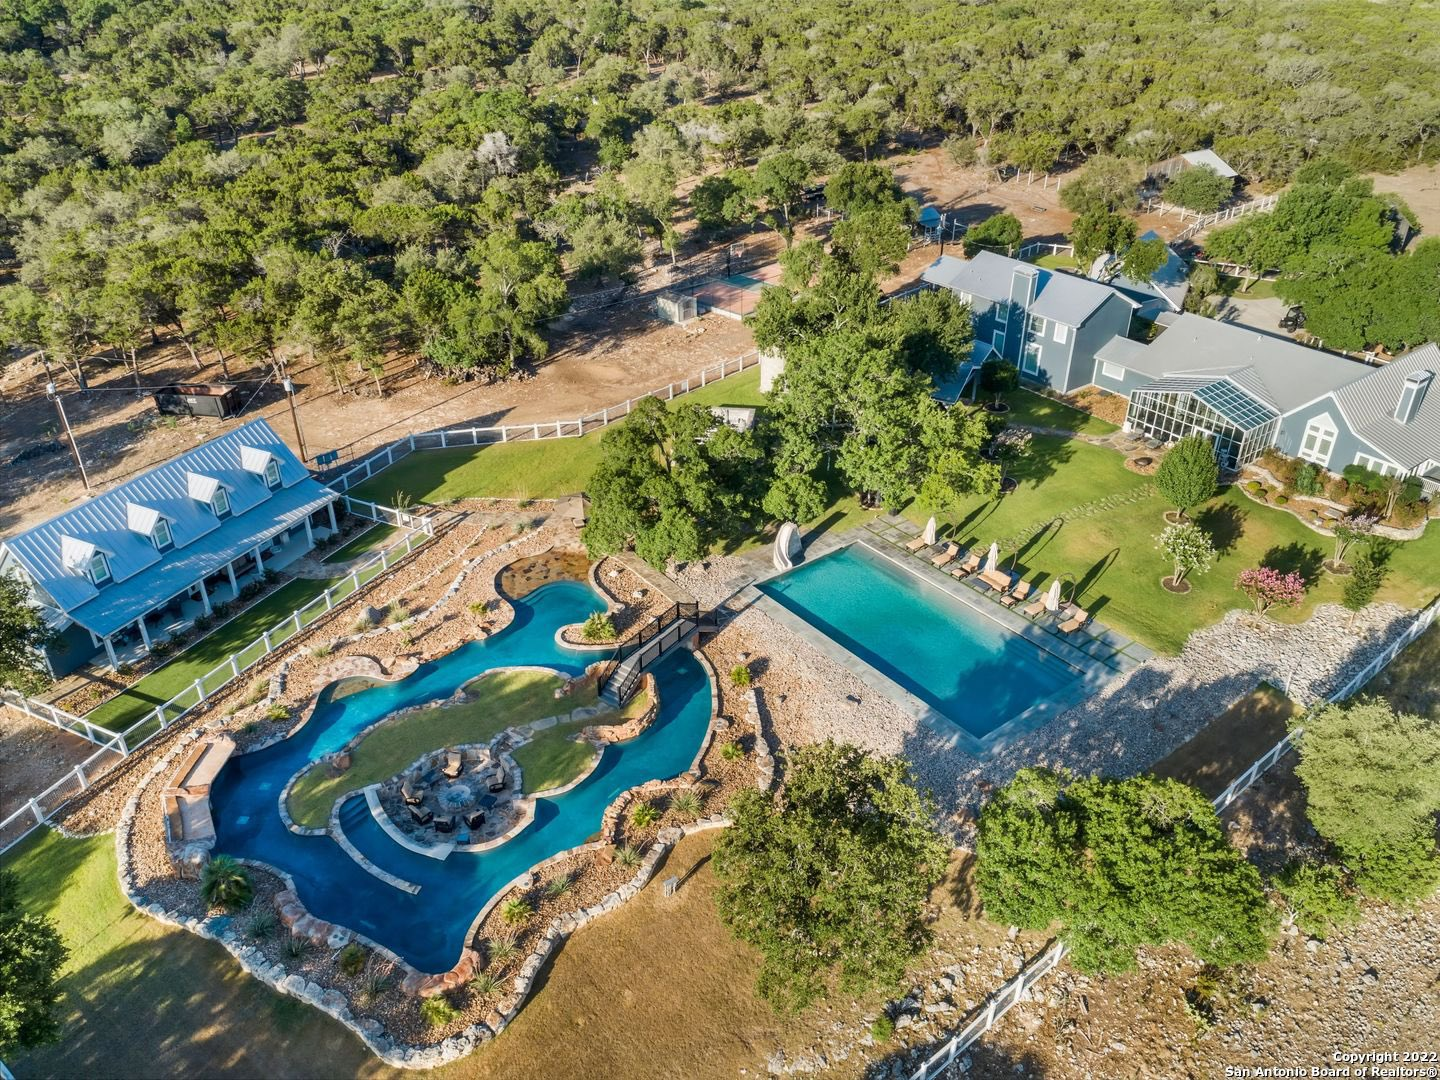 72+ Acre Texas Home With Lazy River for $4,850,000